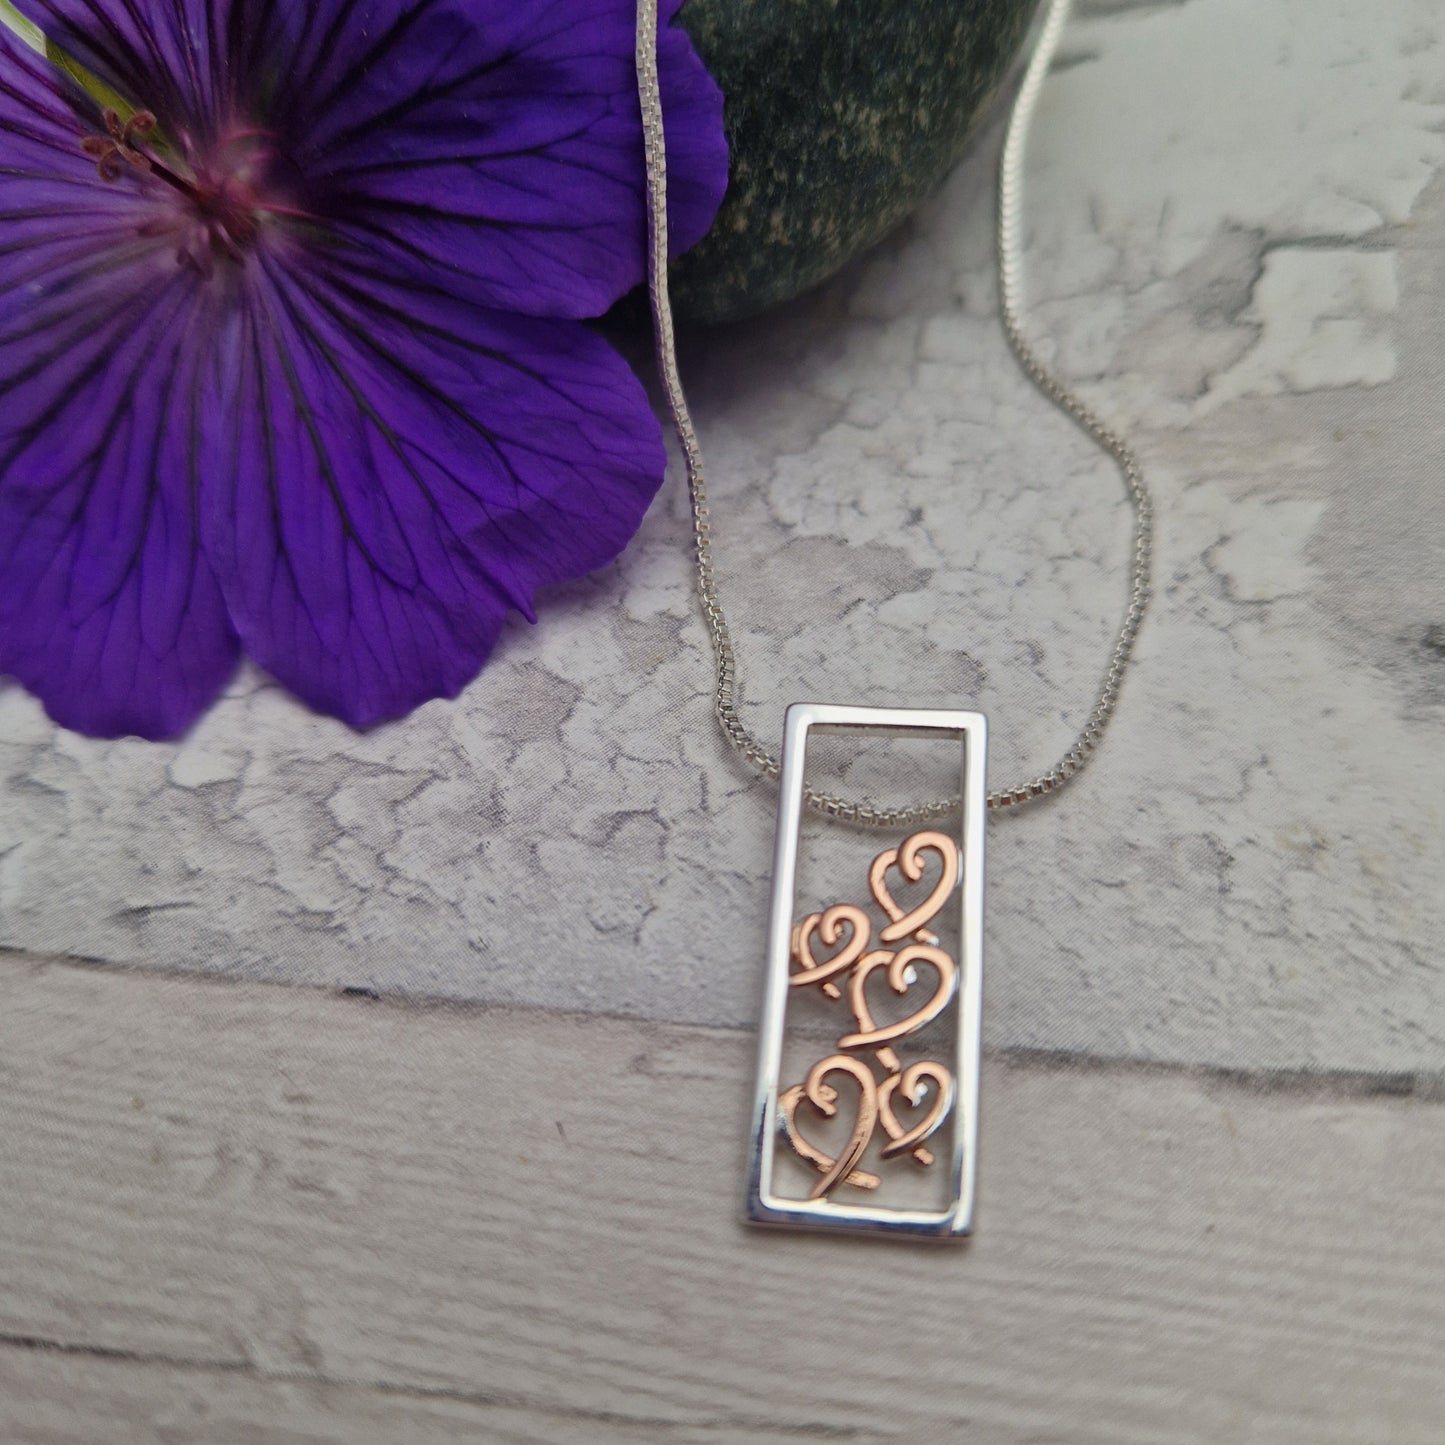 Rectabgle shaped pendant filled with rose gold love hearts.